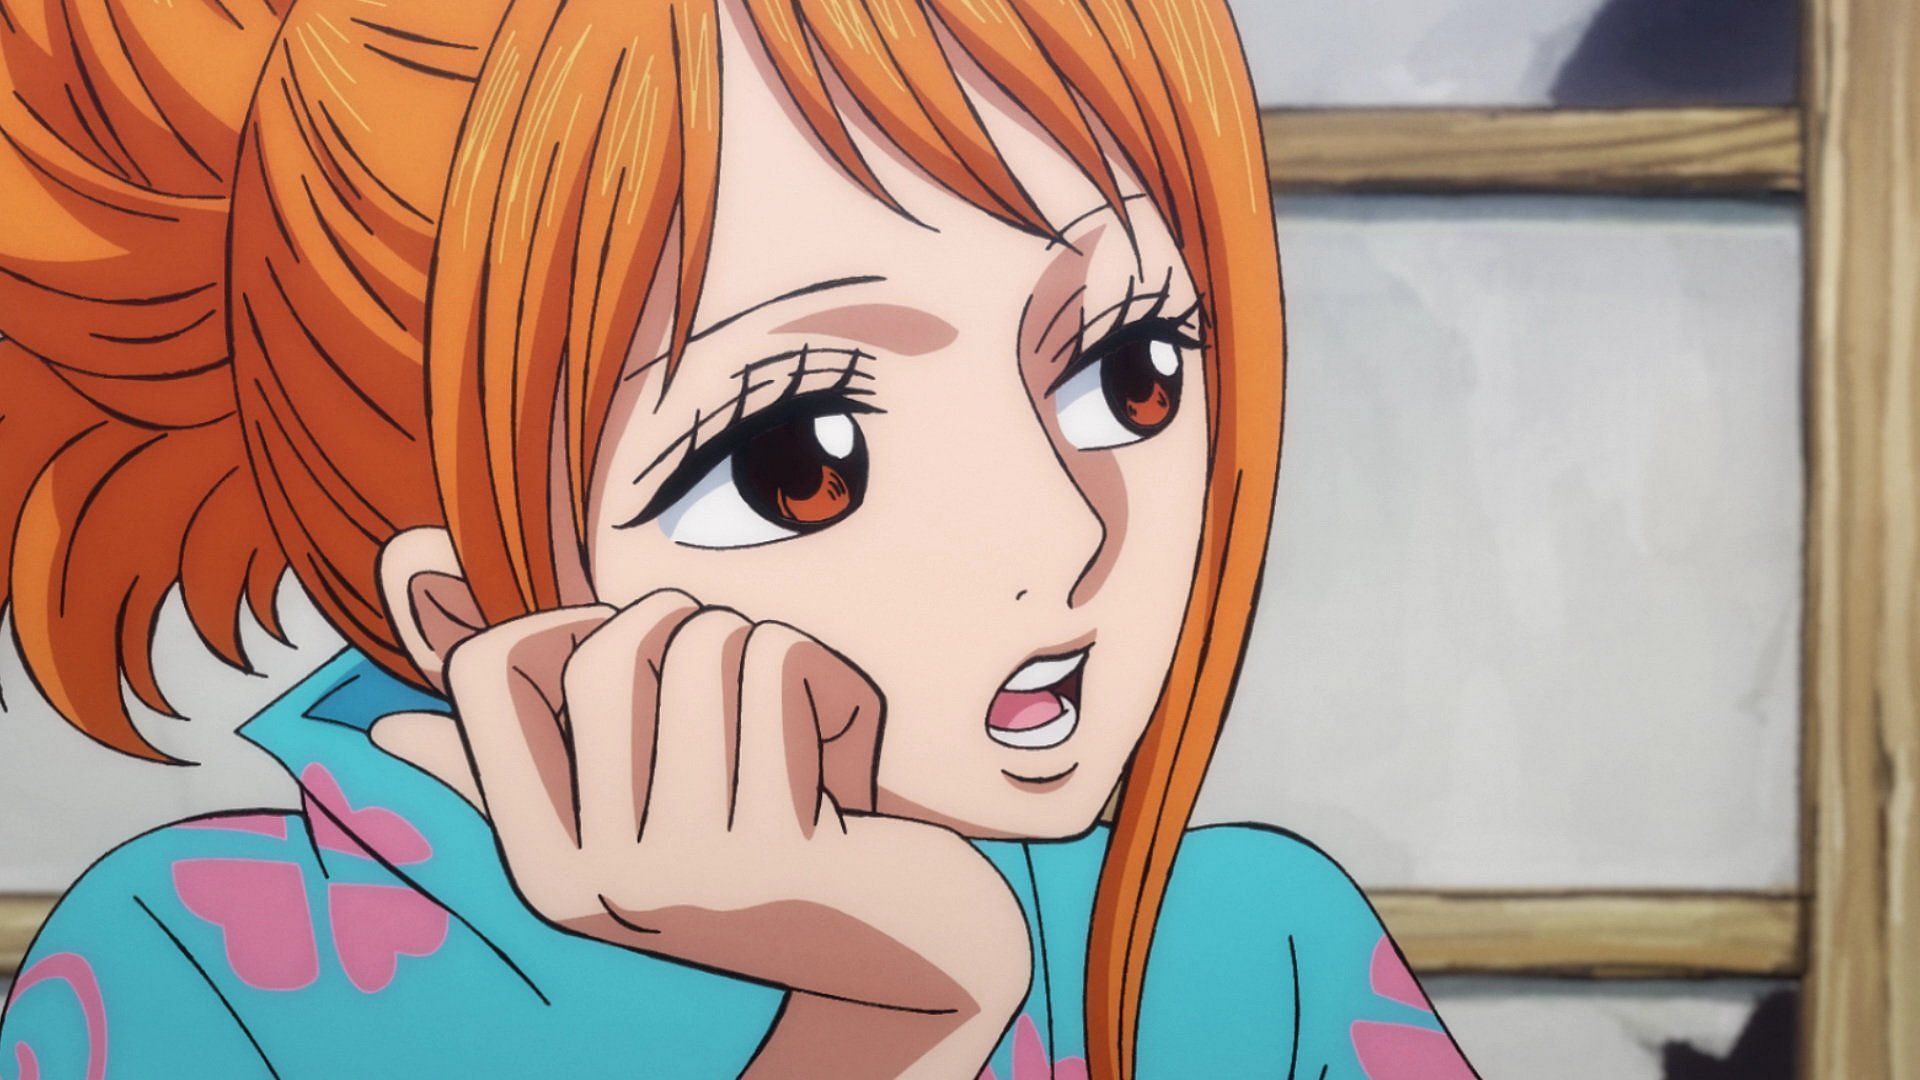 10 One Piece waifus ranked from the least simped over to the most